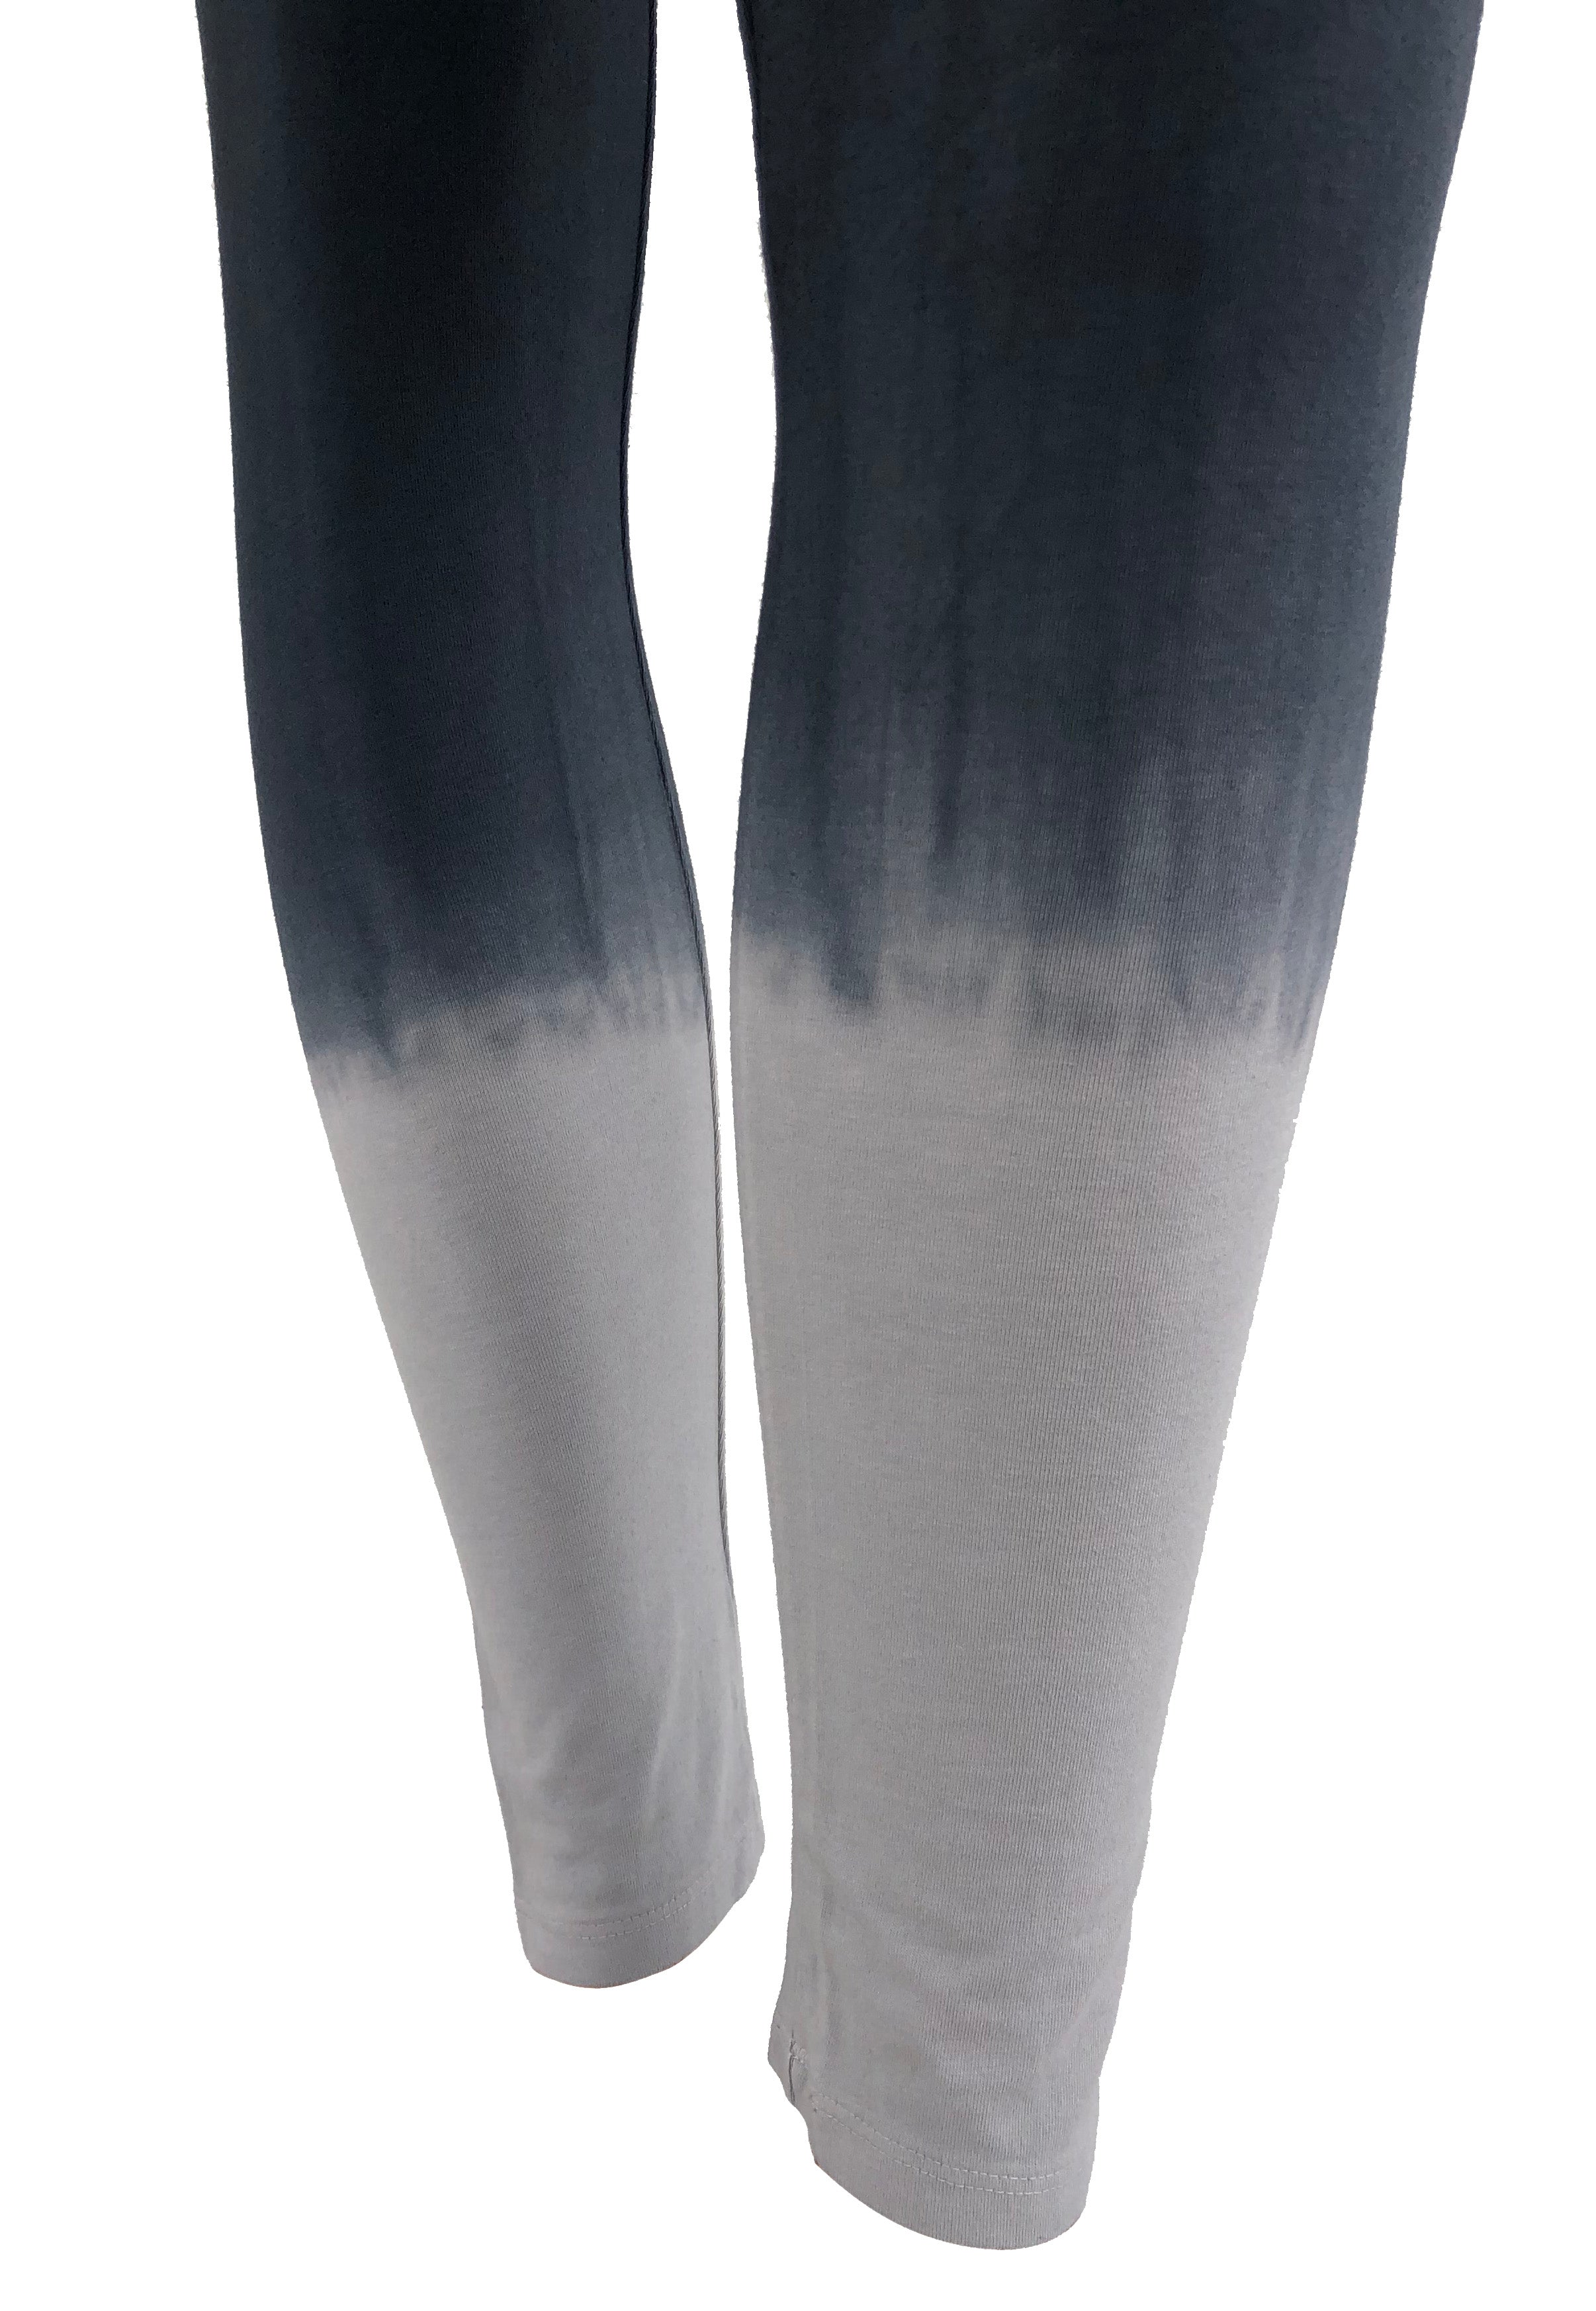 SWEET VIRTUES Women's -Orderly- Leggings with Tummy Control -Black & Gray Ombre